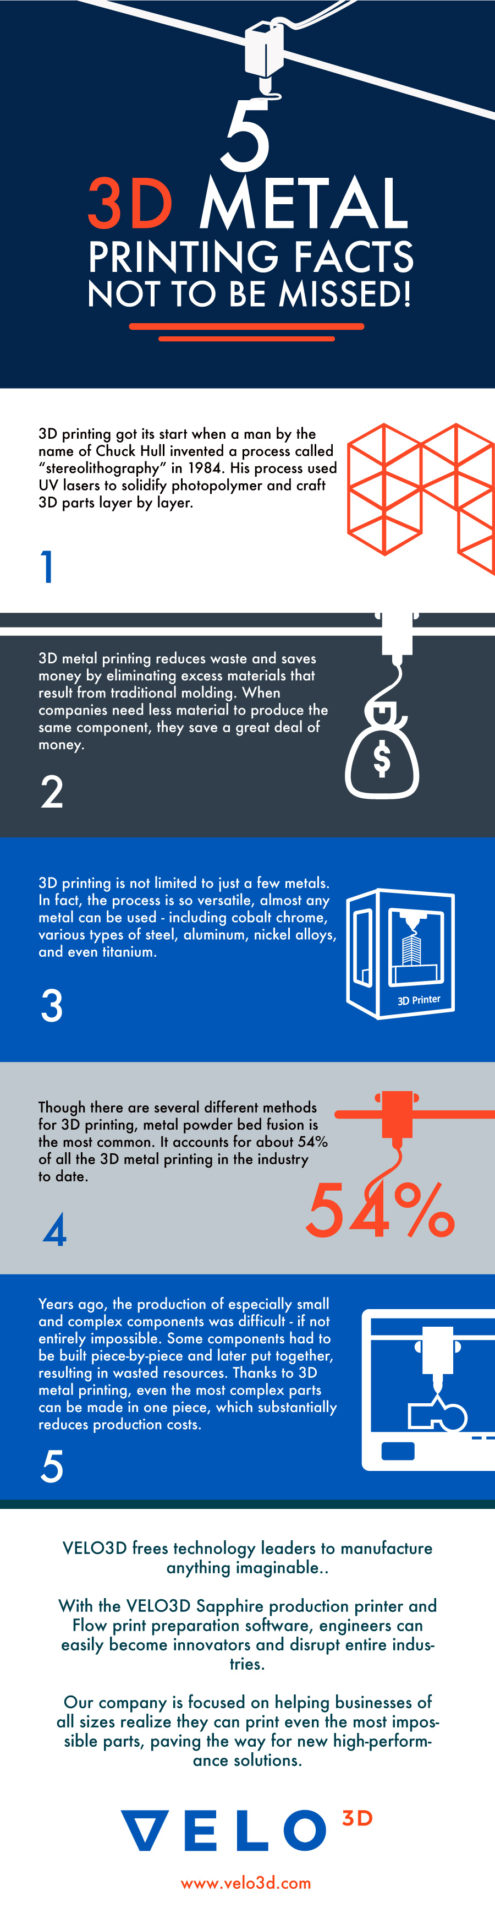 3D Metal Printing Facts Not to Be Missed!